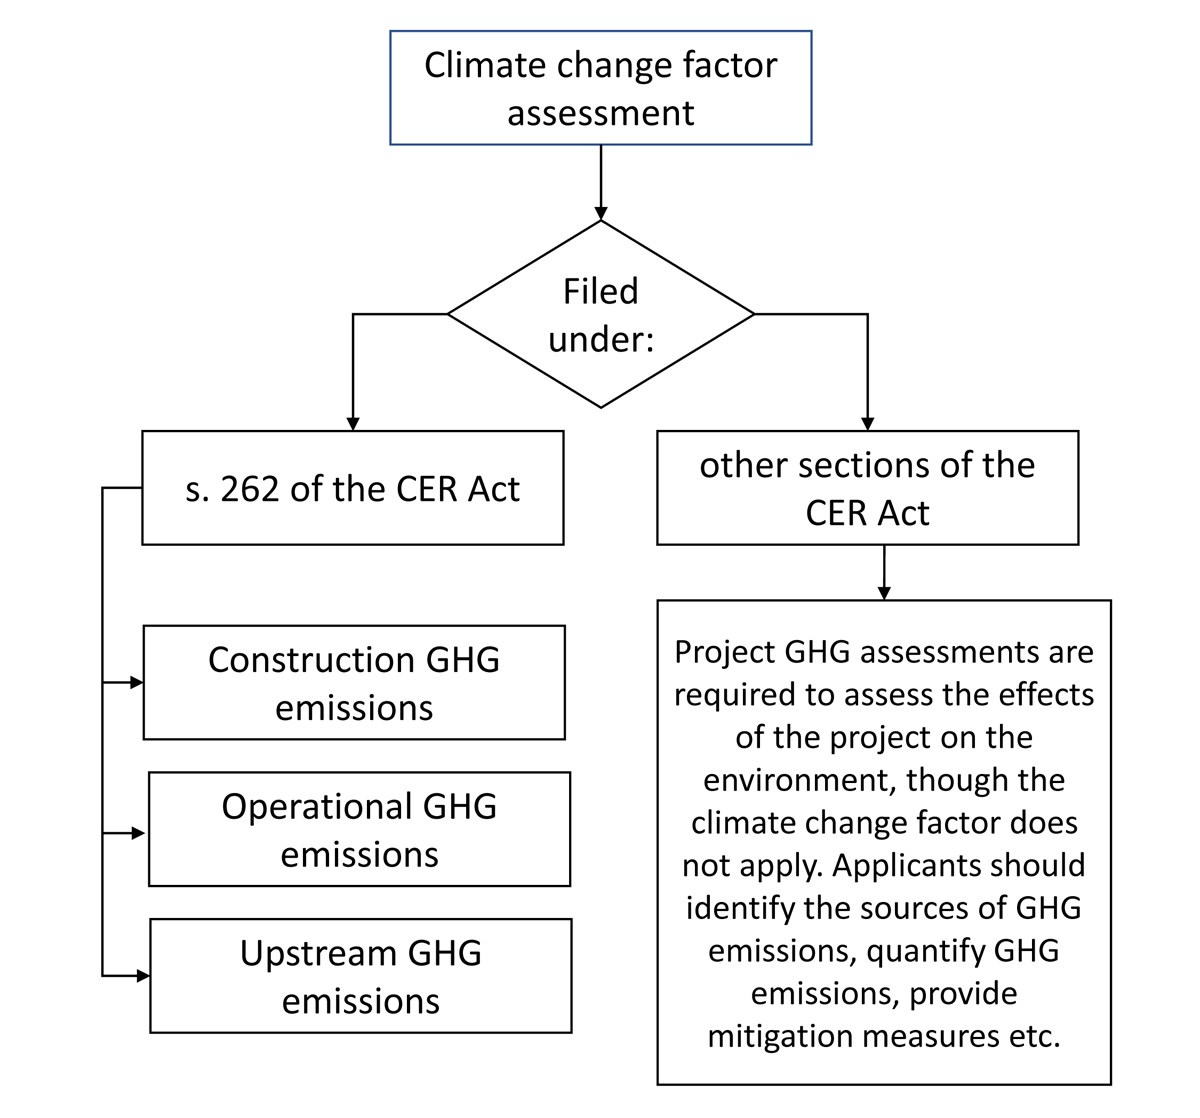 Figure 6-2: Scalable approach to climate change factor assessment